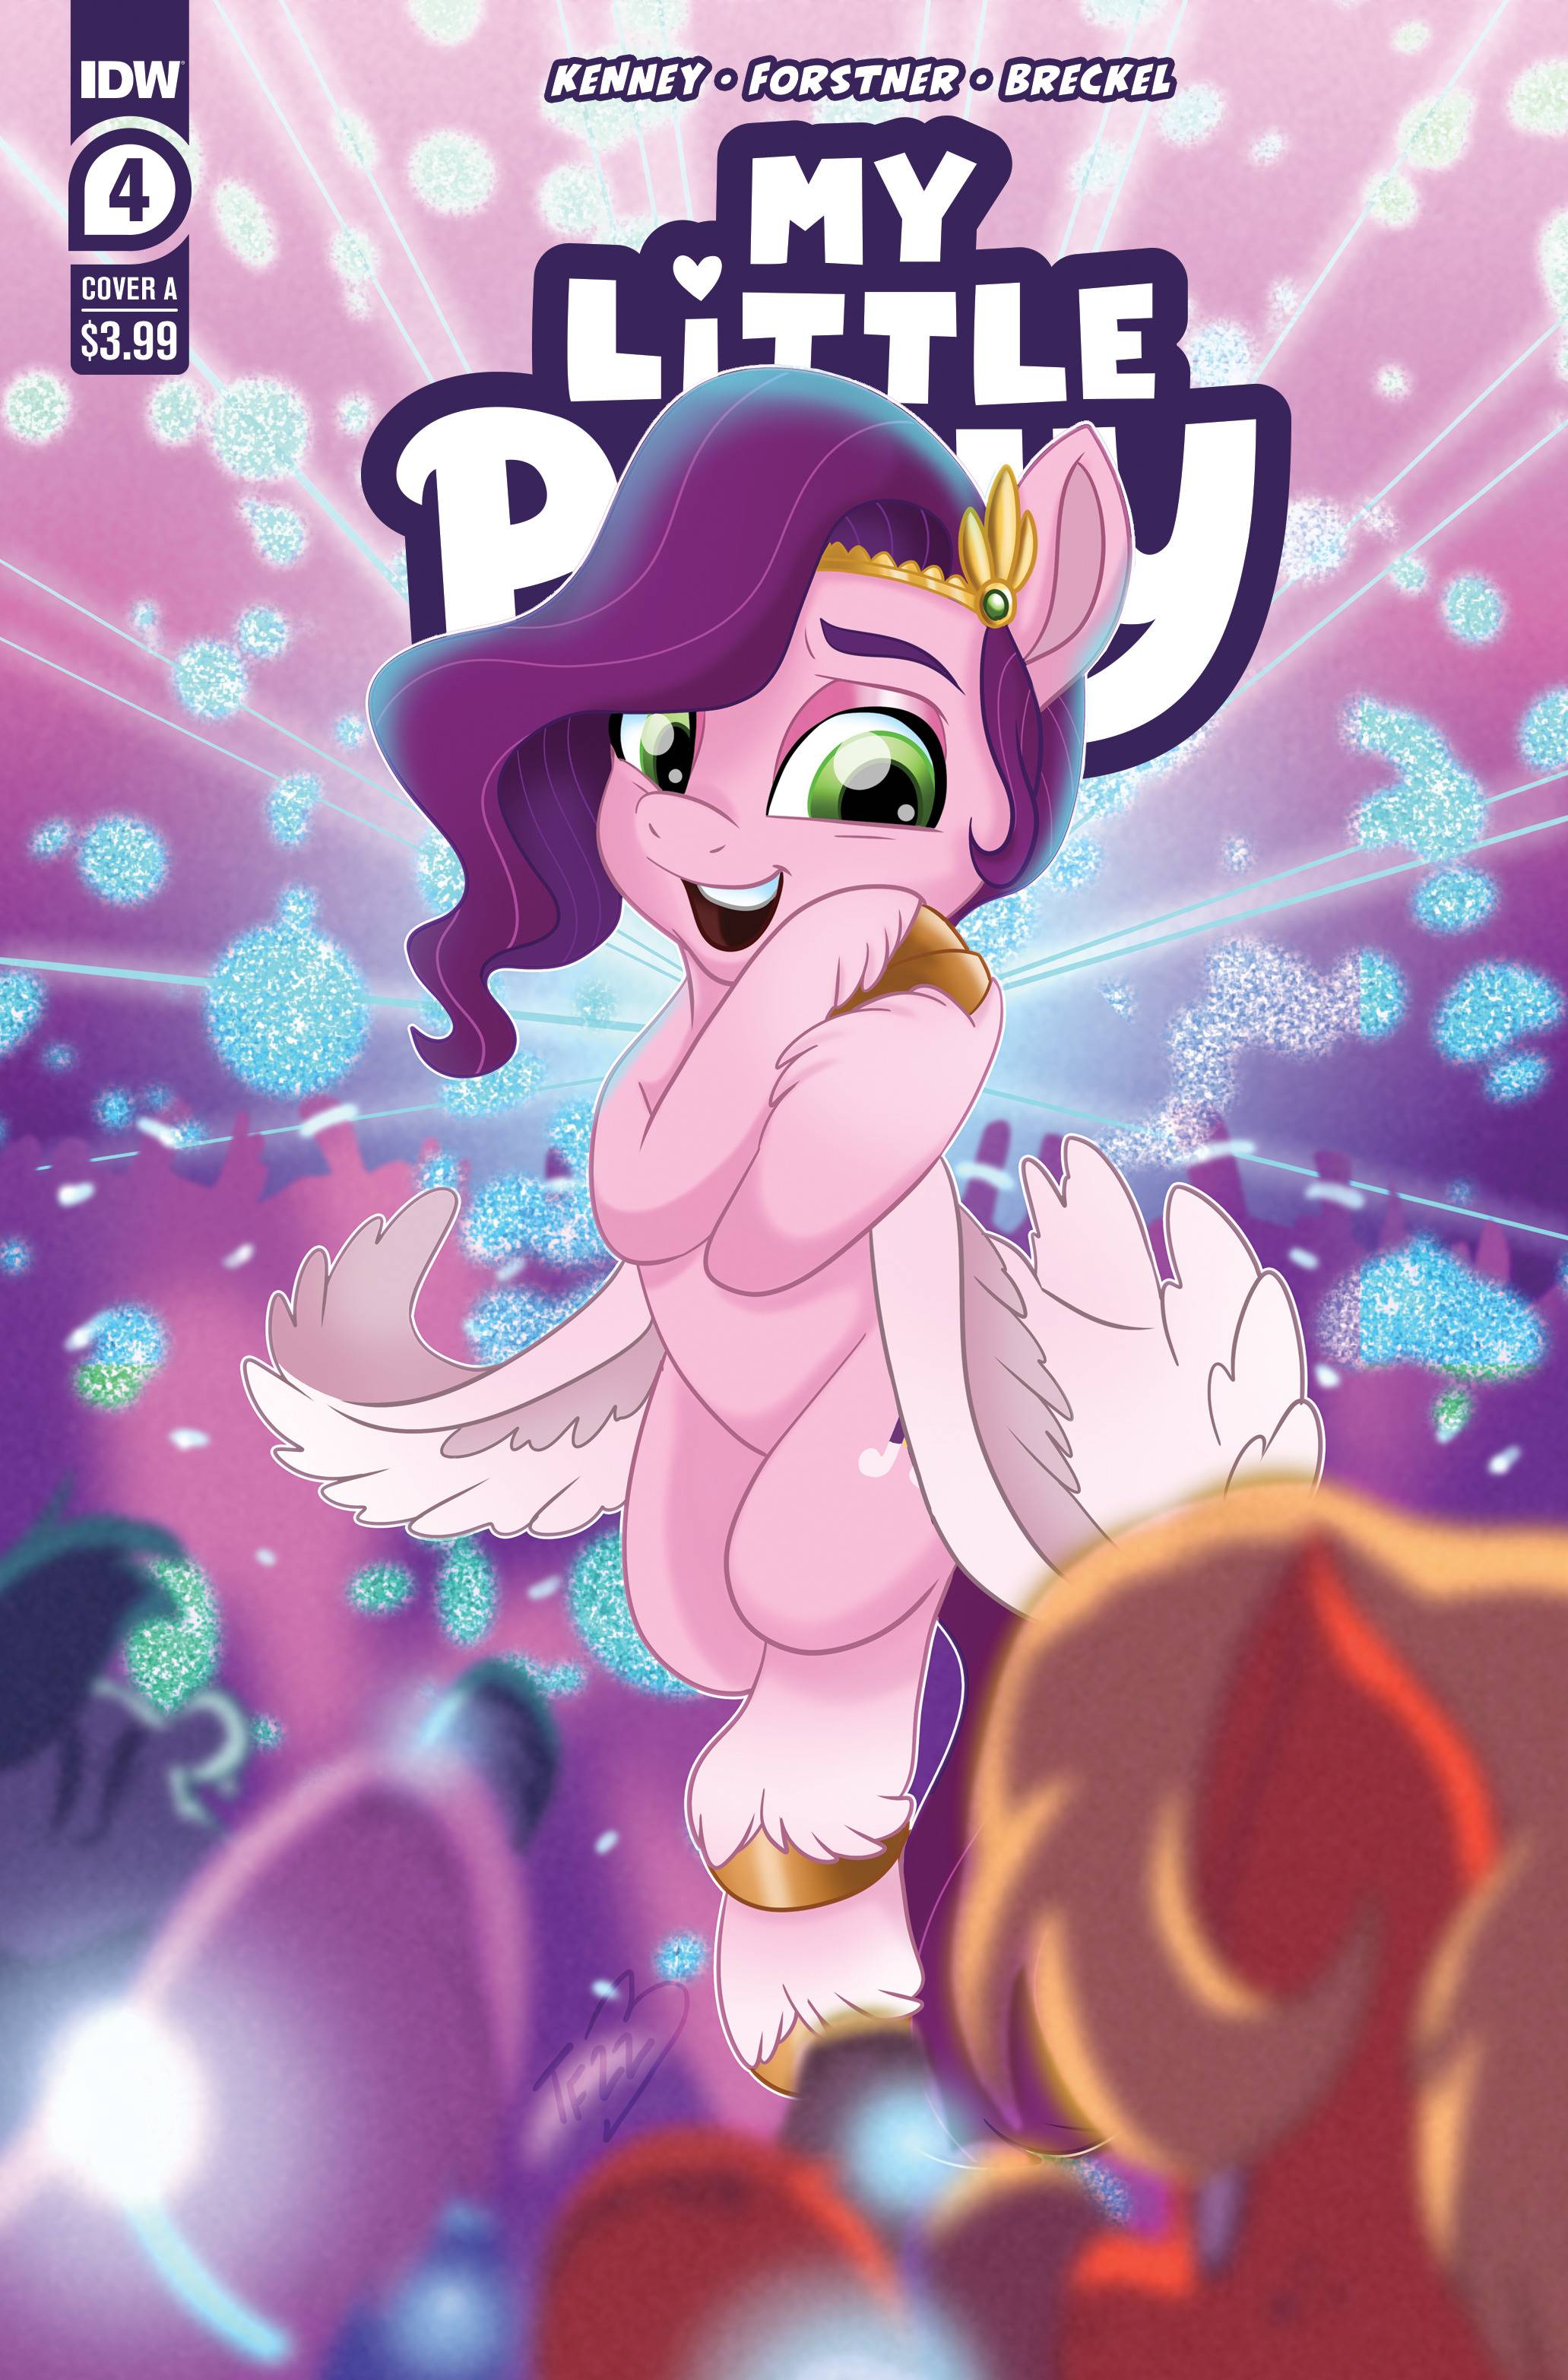 My Little Pony #4 Cover A